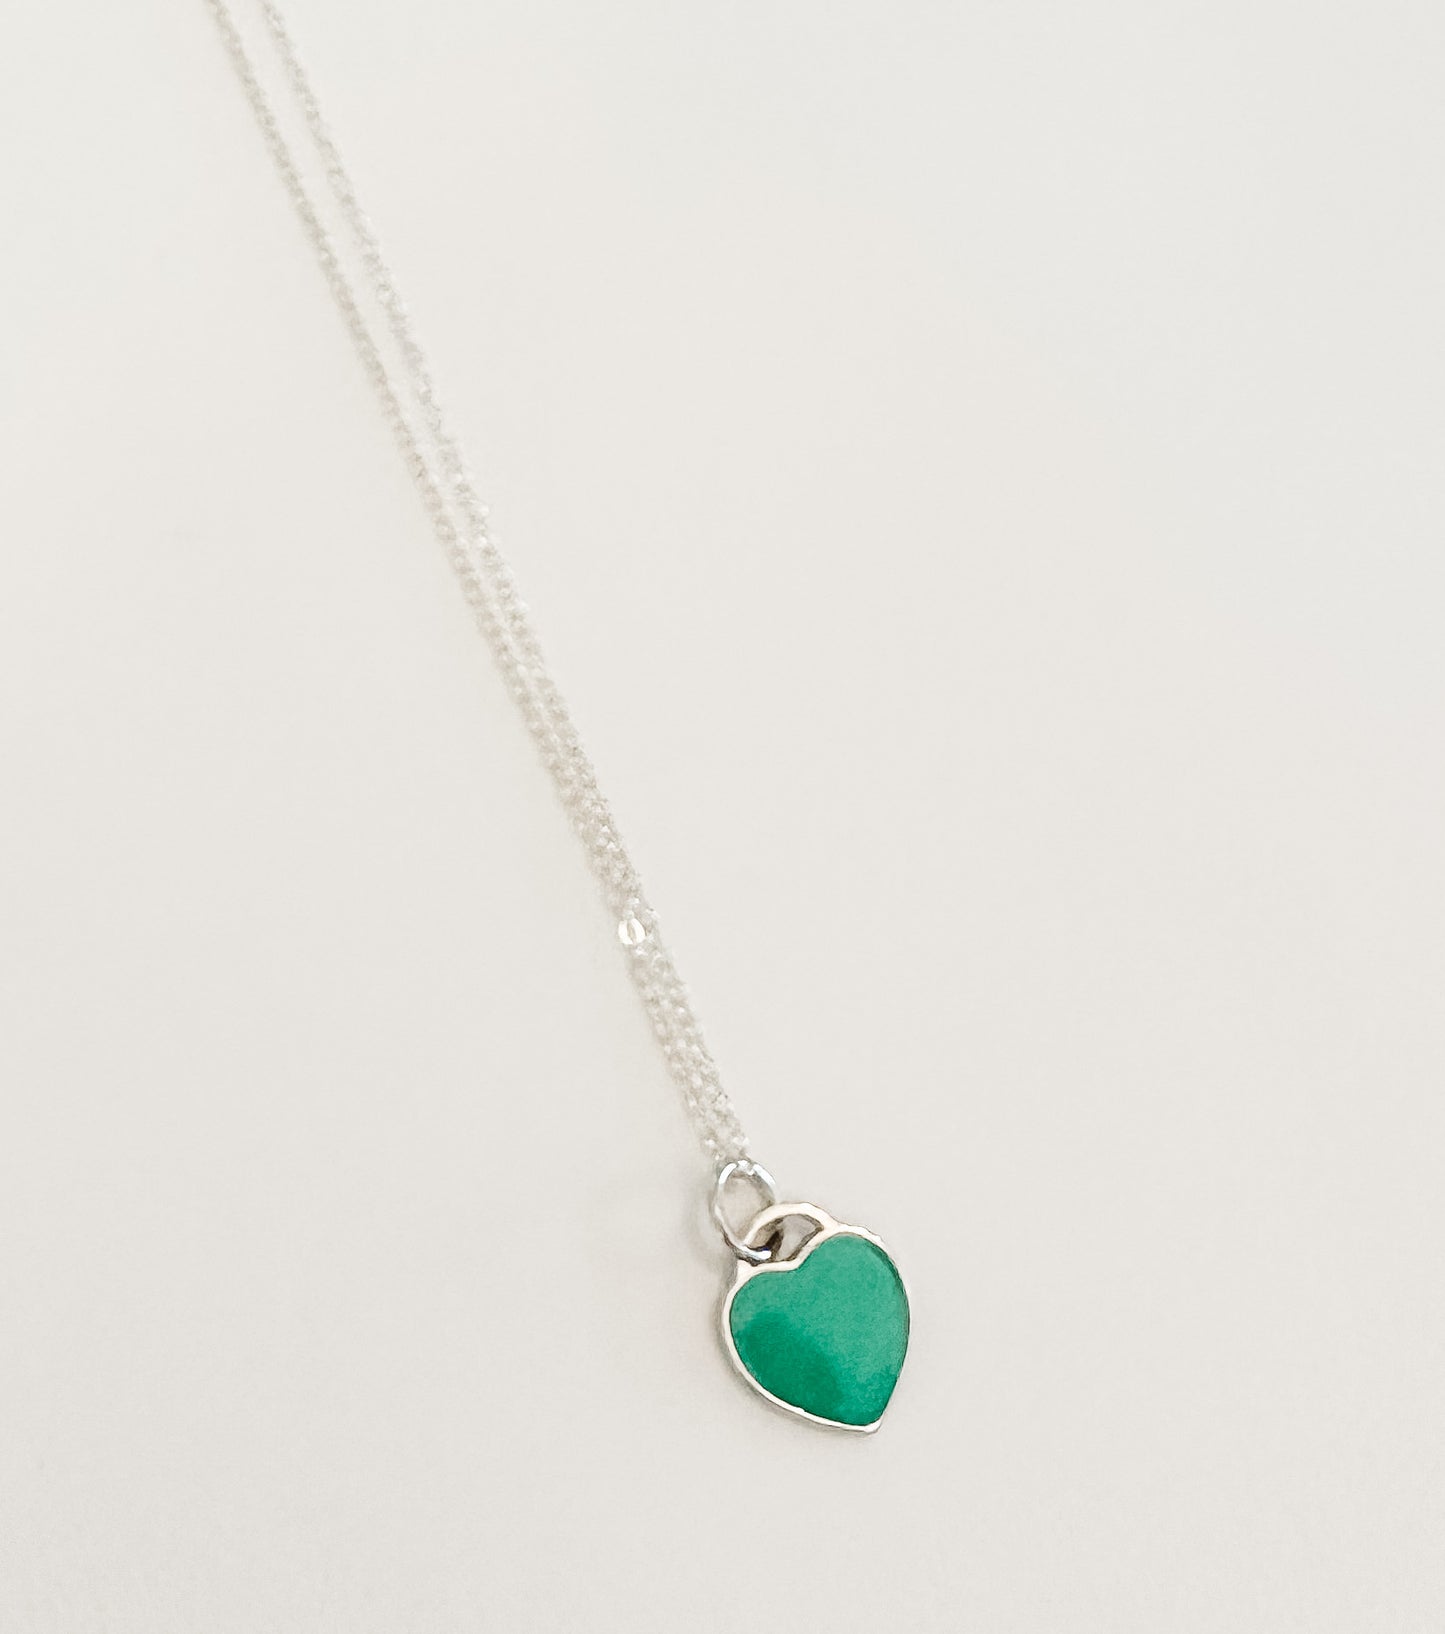 The Tiffany Inspired Necklace